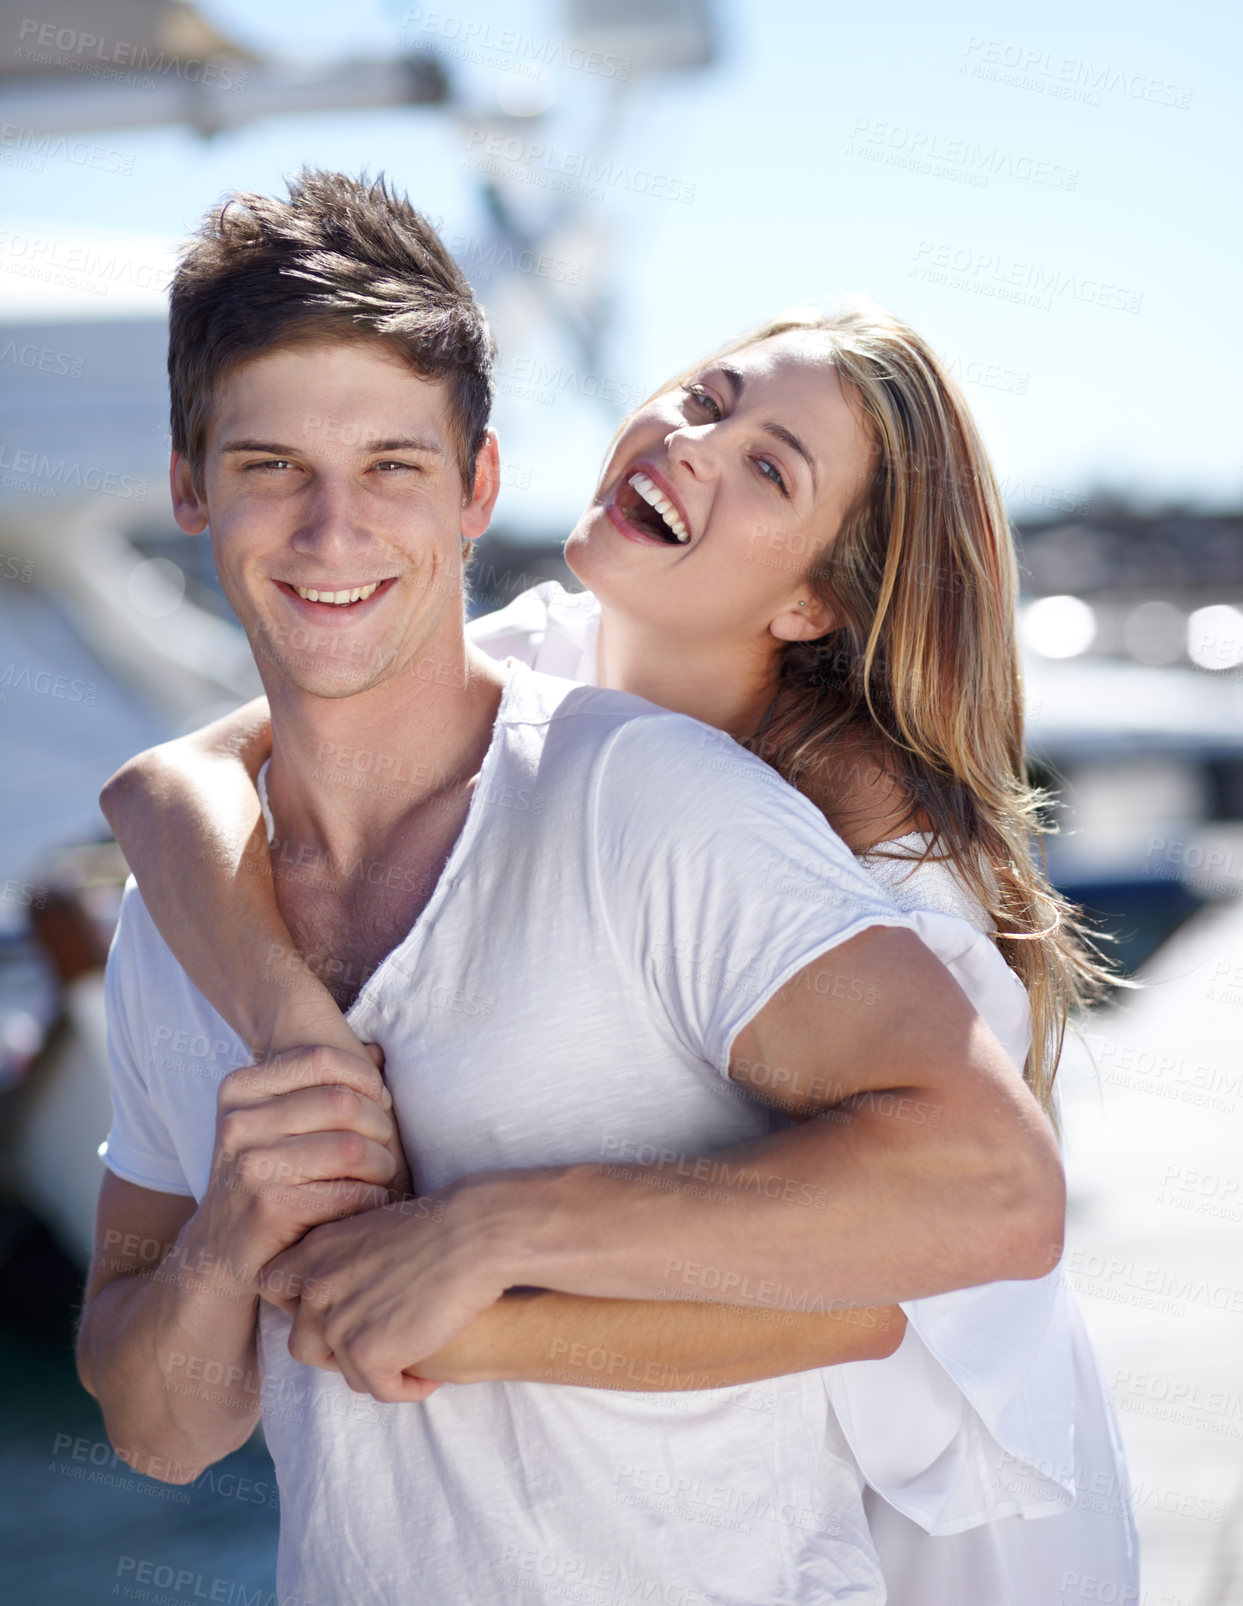 Buy stock photo Happiness, love and portrait of couple on a date together feeling happy on a romantic vacation or holiday in summer. Portrait, travel and woman hug man in a relationship and smile outdoor with care